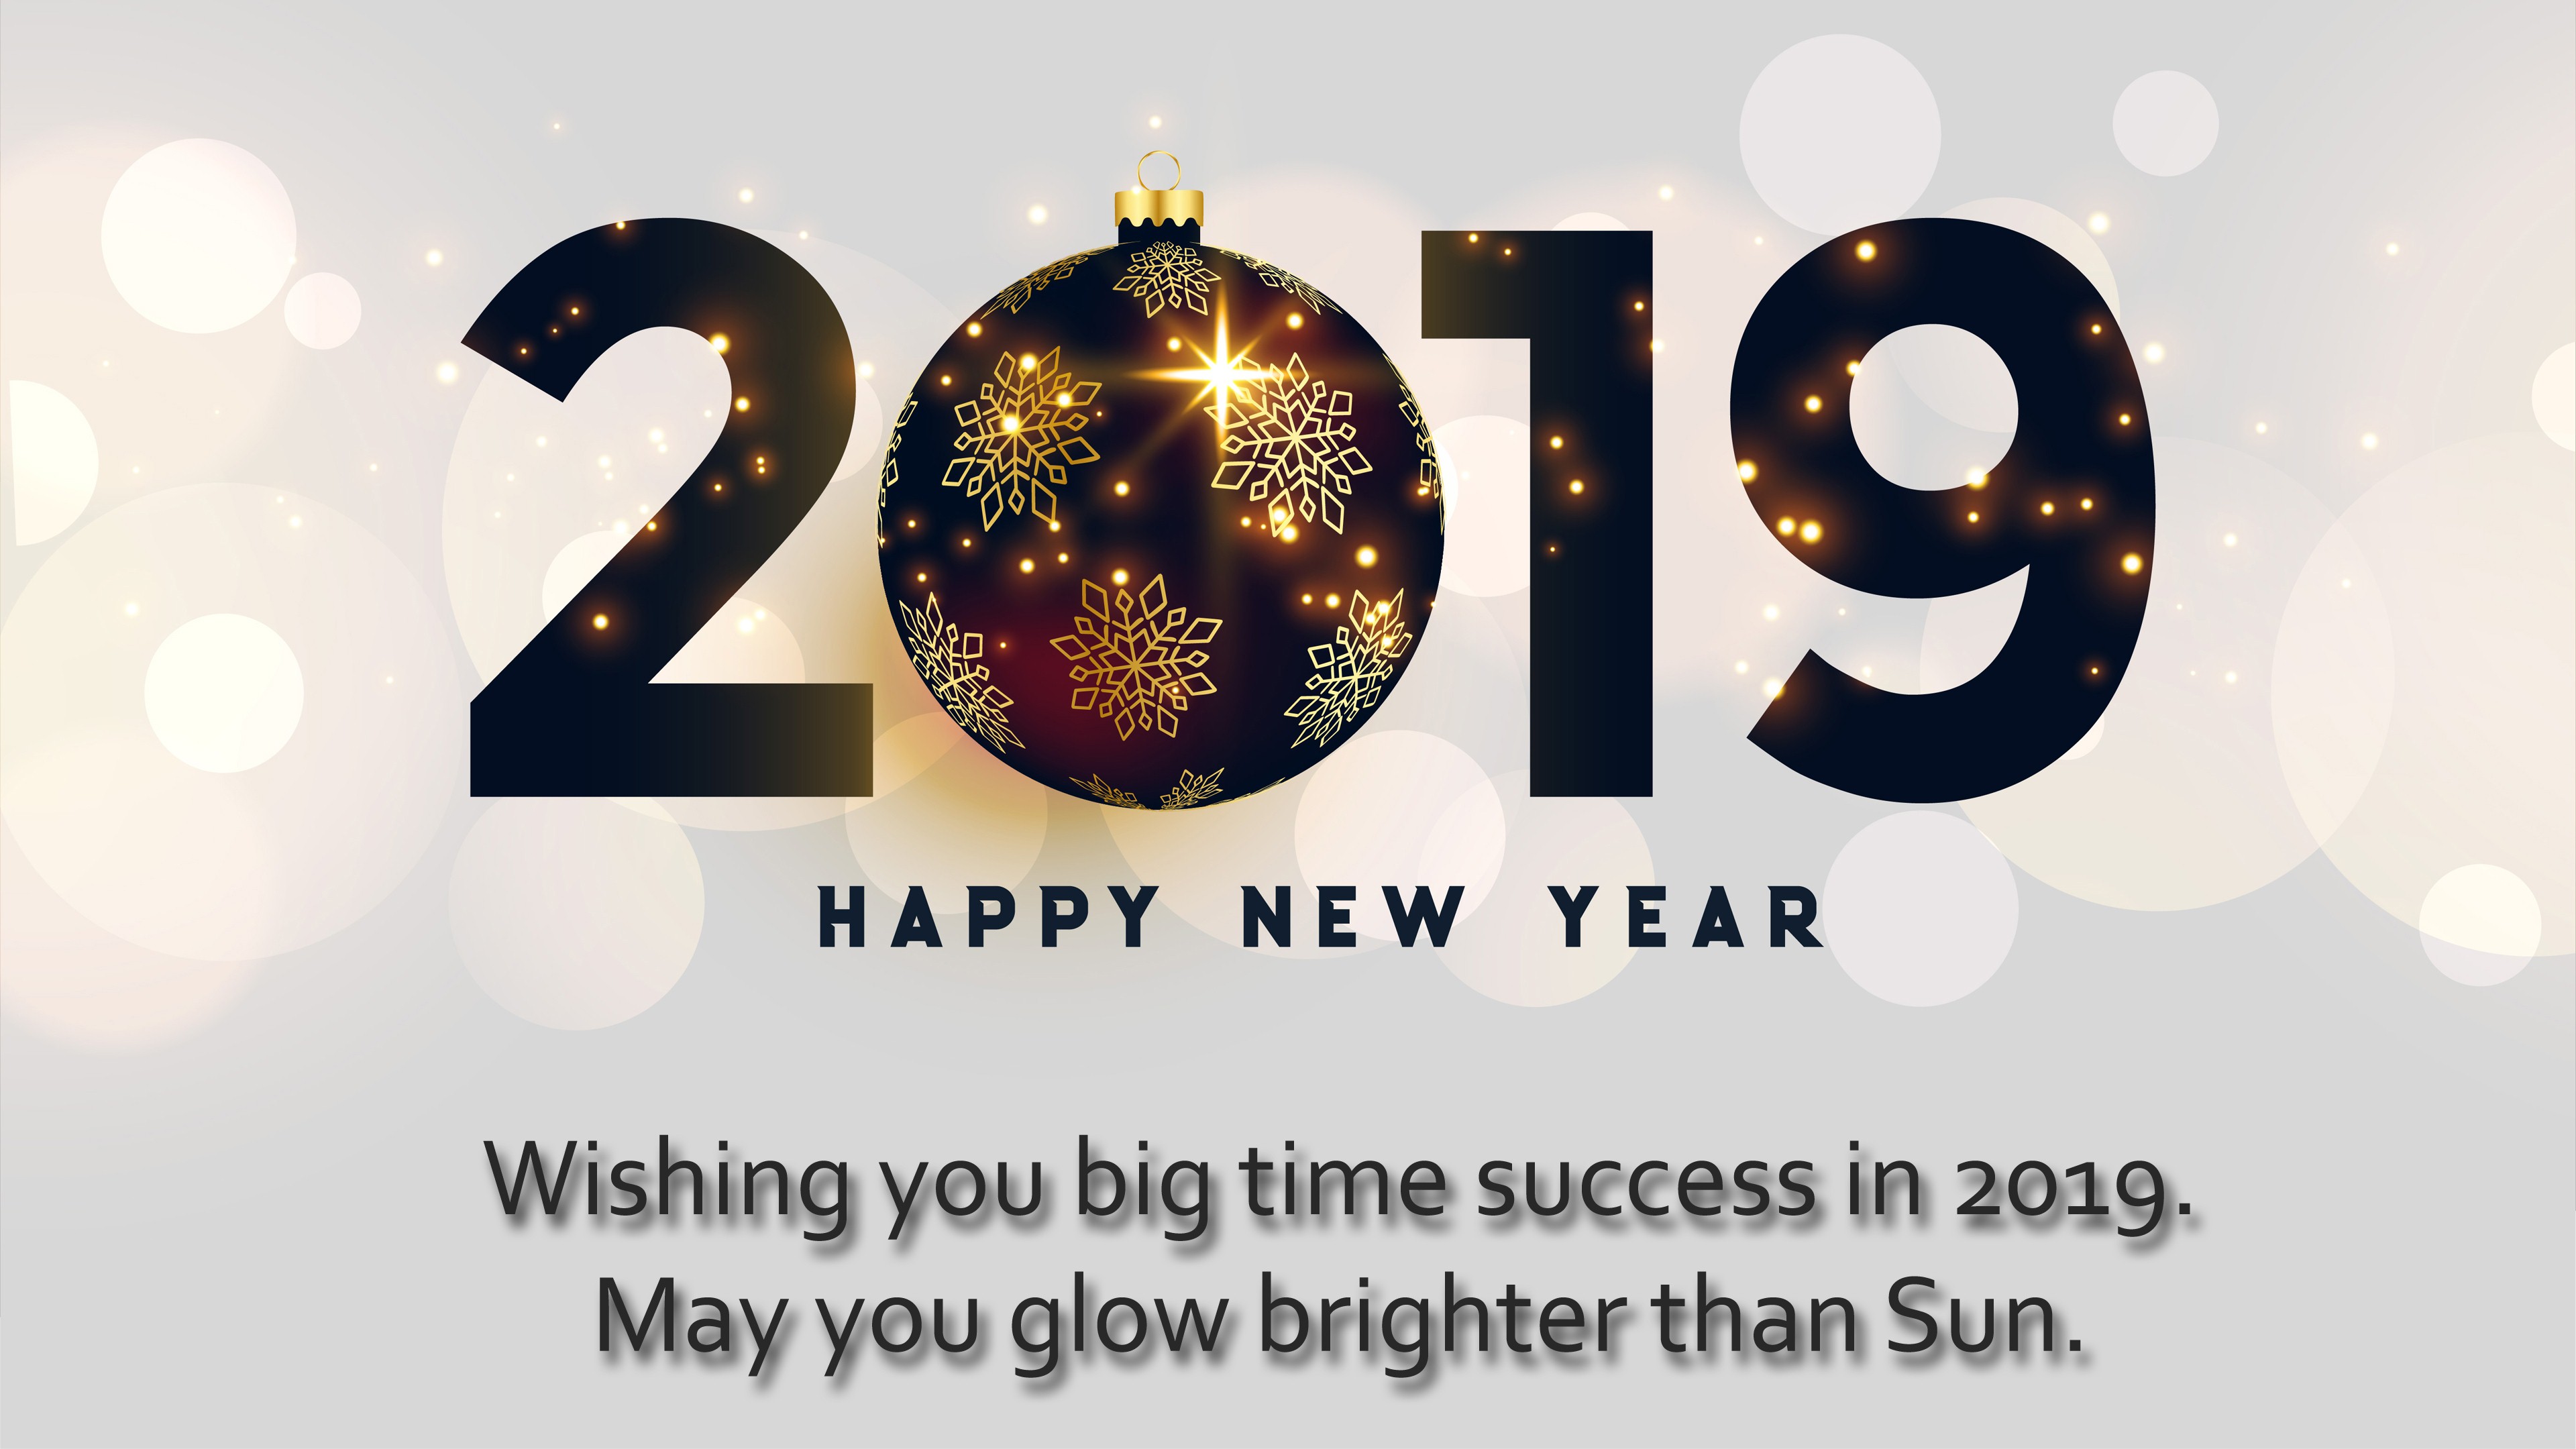 2019 Happy New Year Greeting Message 4k Wallpaper - 2019 Happy New Year Wallpaper Hd - HD Wallpaper 